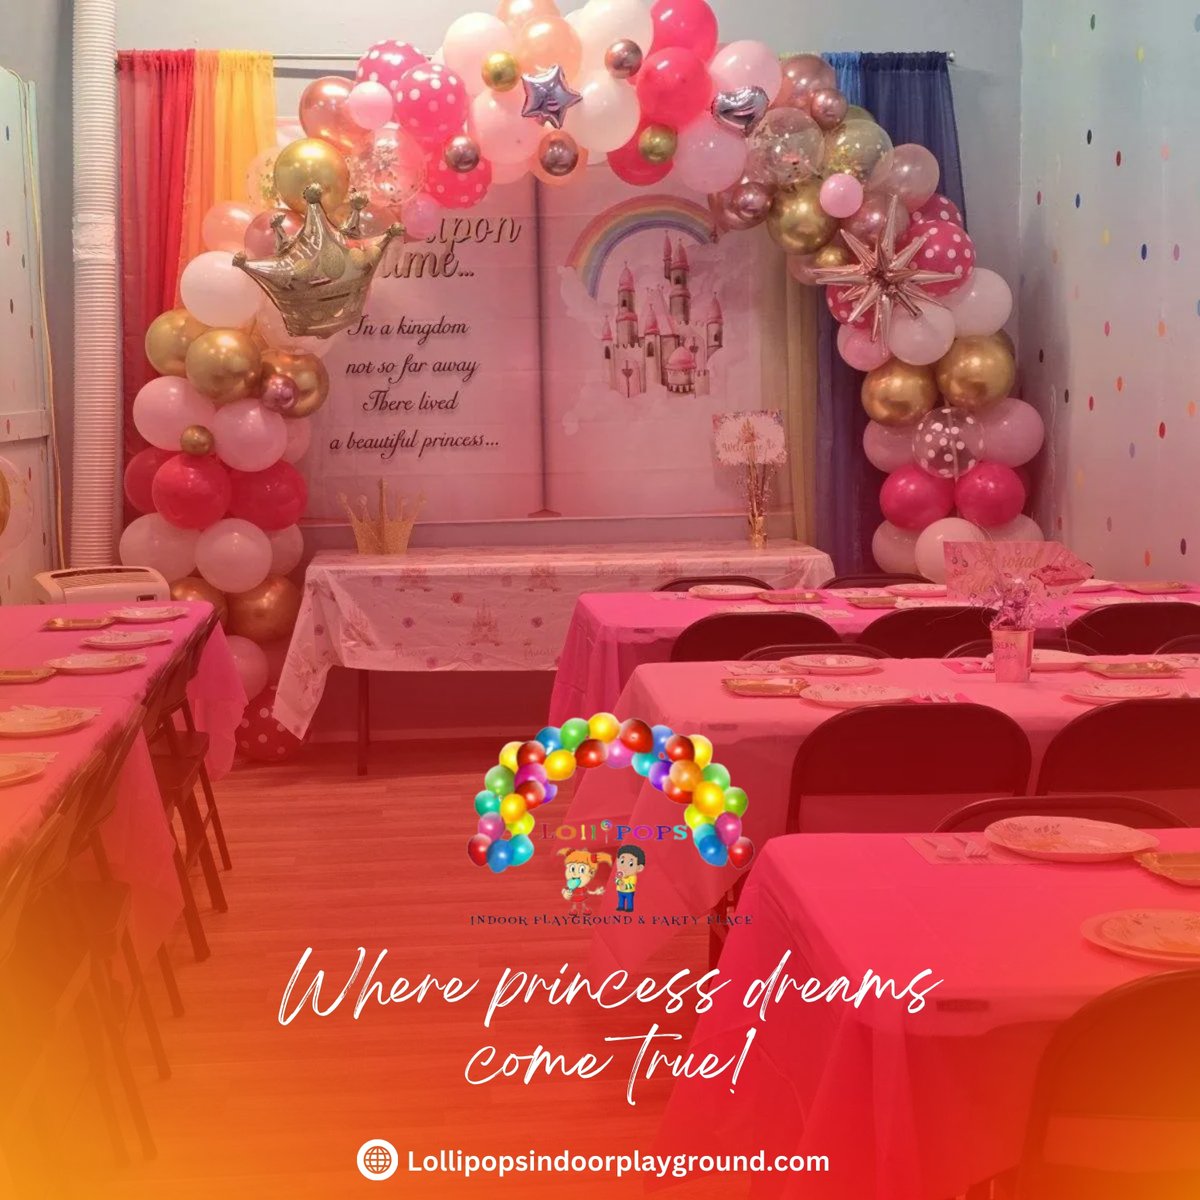 A royal soiree awaits at Lollipops Playground! Immerse in a princess party where fairy tales are real. Book your magical celebration at indoorplaygroundpartyplace.com or call (407) 420-7219! 

#PrincessParty #MagicalMemories #PartyLikeARoyal